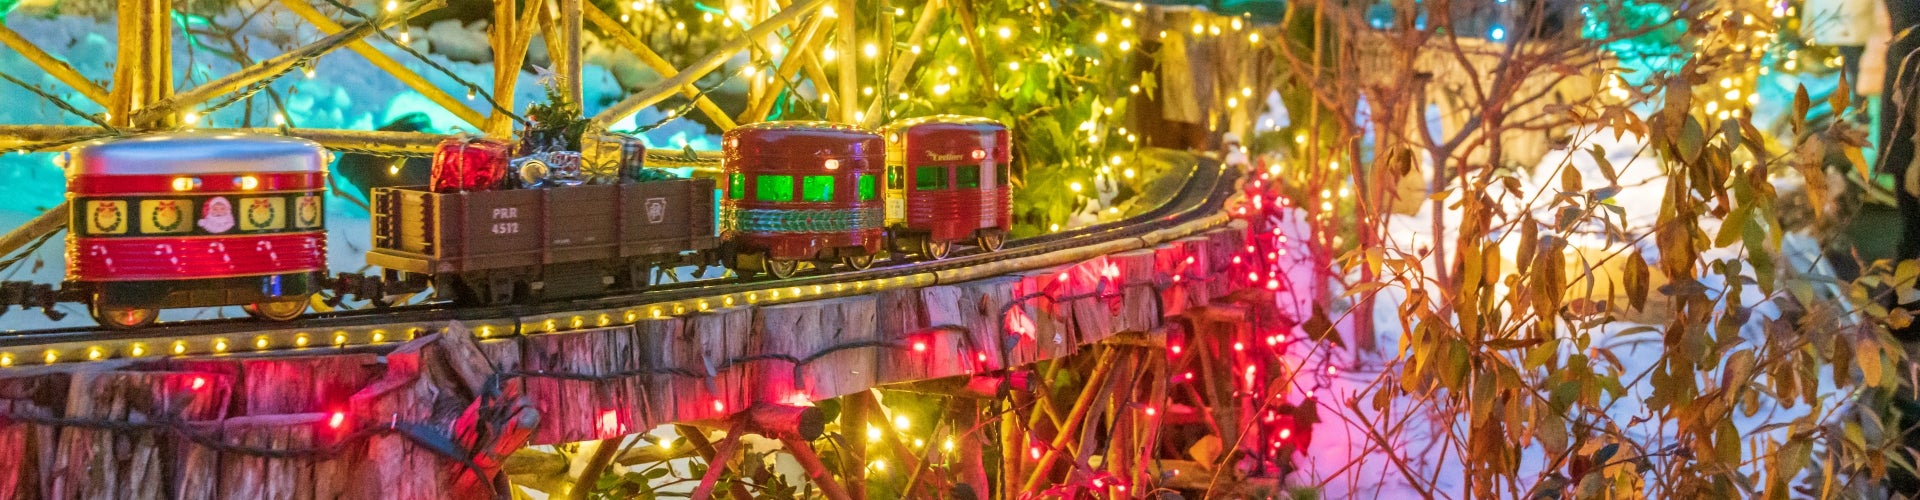 A miniature train display decorated for Christmas. 